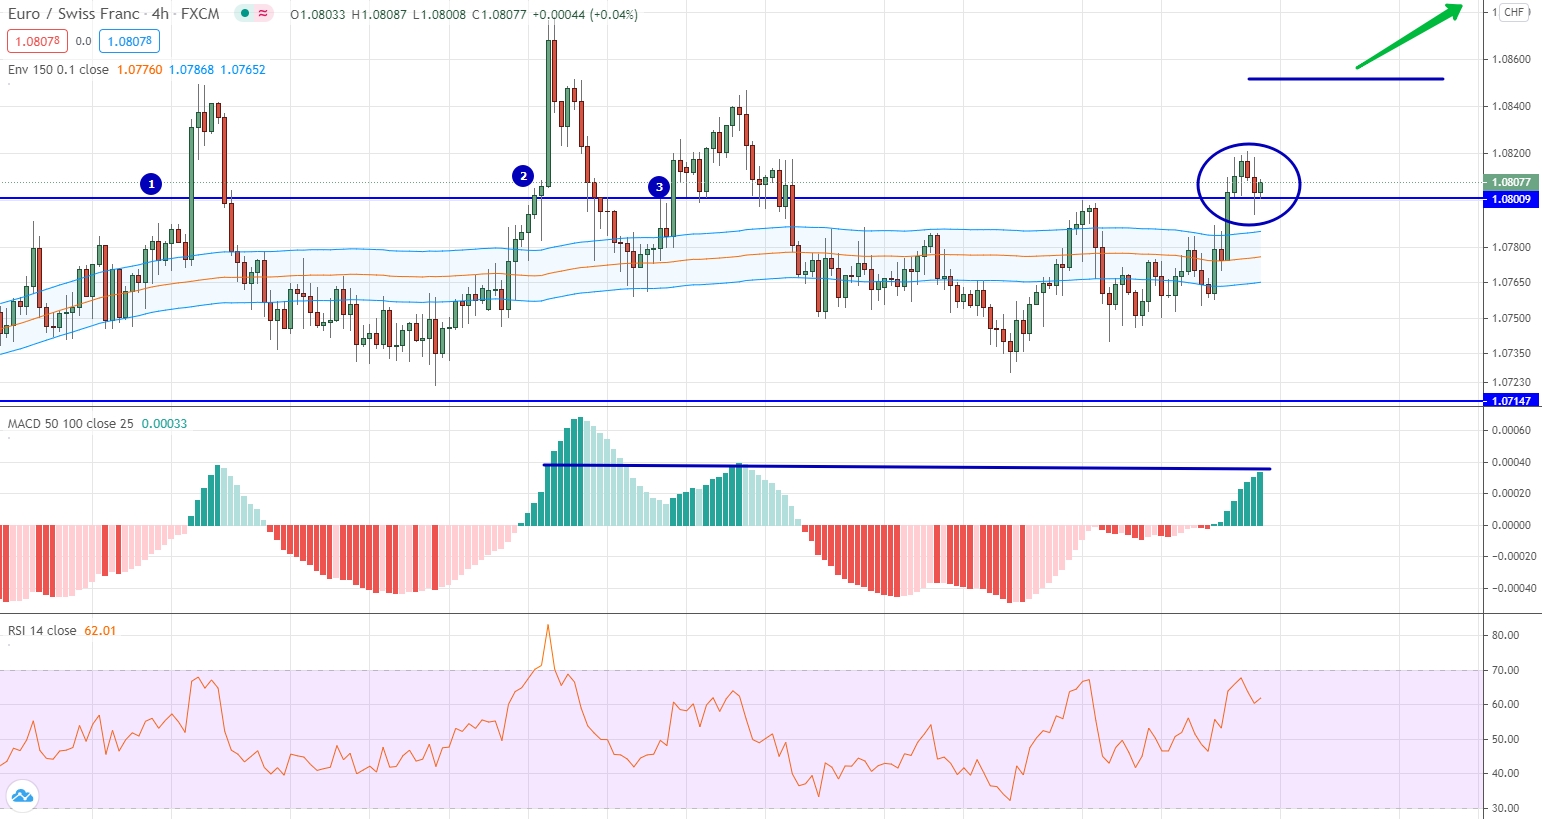 Forex Weekly Forecast & FX Analysis September 28 - October 2